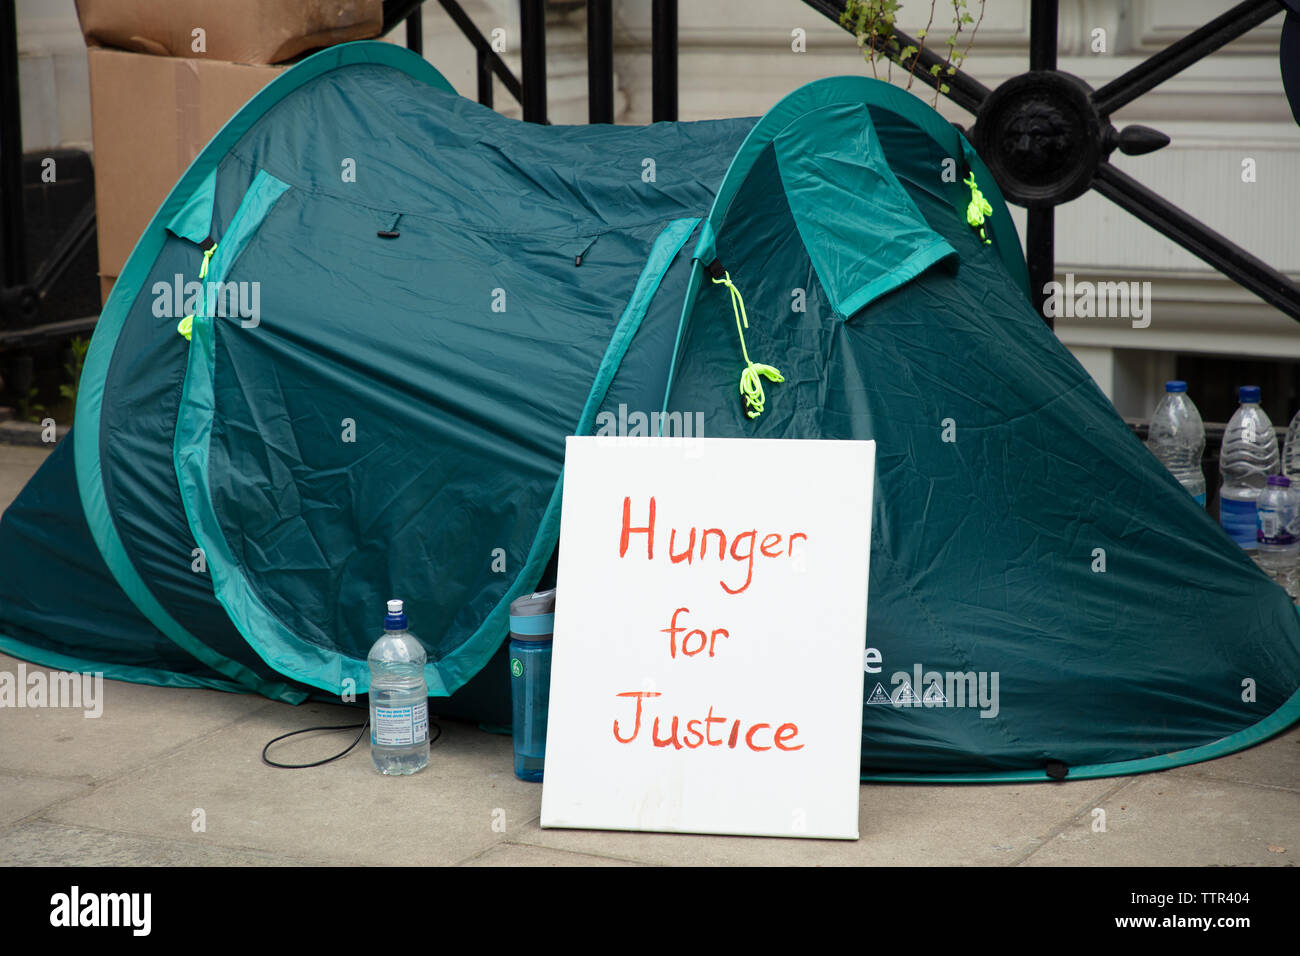 London, UK. 17th June 2019. Tent of hunger striker Richard Ratcliffe in front of the Iranian embassy in London in protest of the detention of his wife Nazanin Zaghari in Iran over spying allegations. Credit: Joe Kuis / Alamy Stock Photo